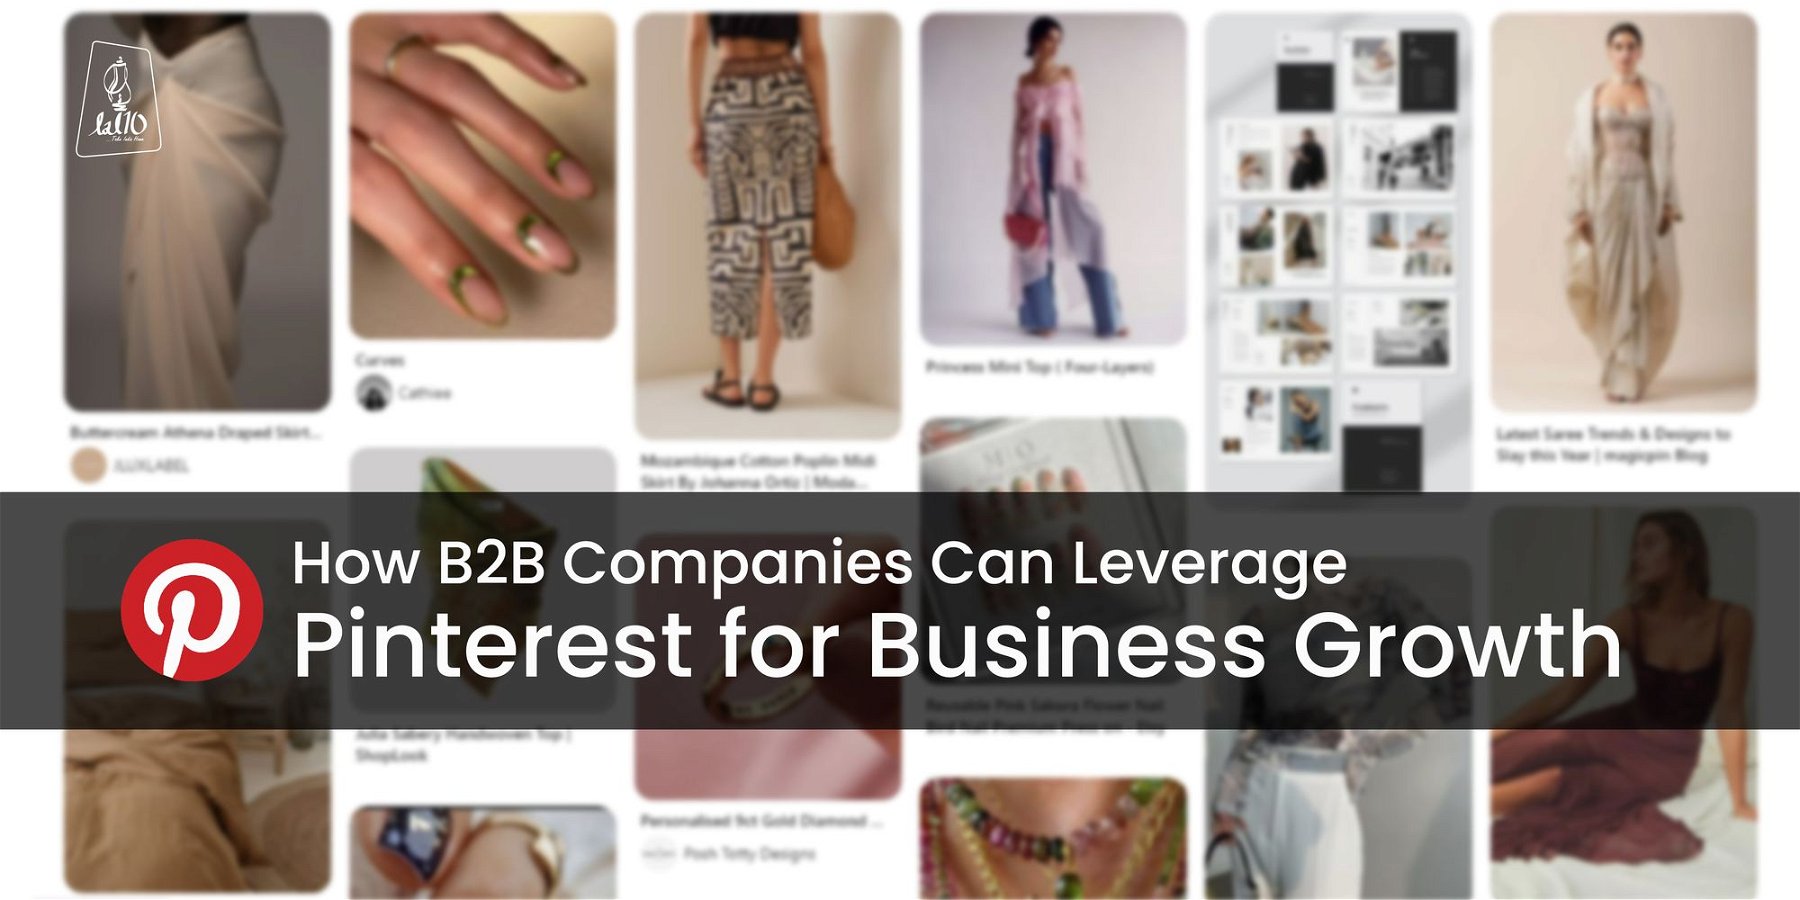 How B2B Companies Can Leverage Pinterest for Business Growth